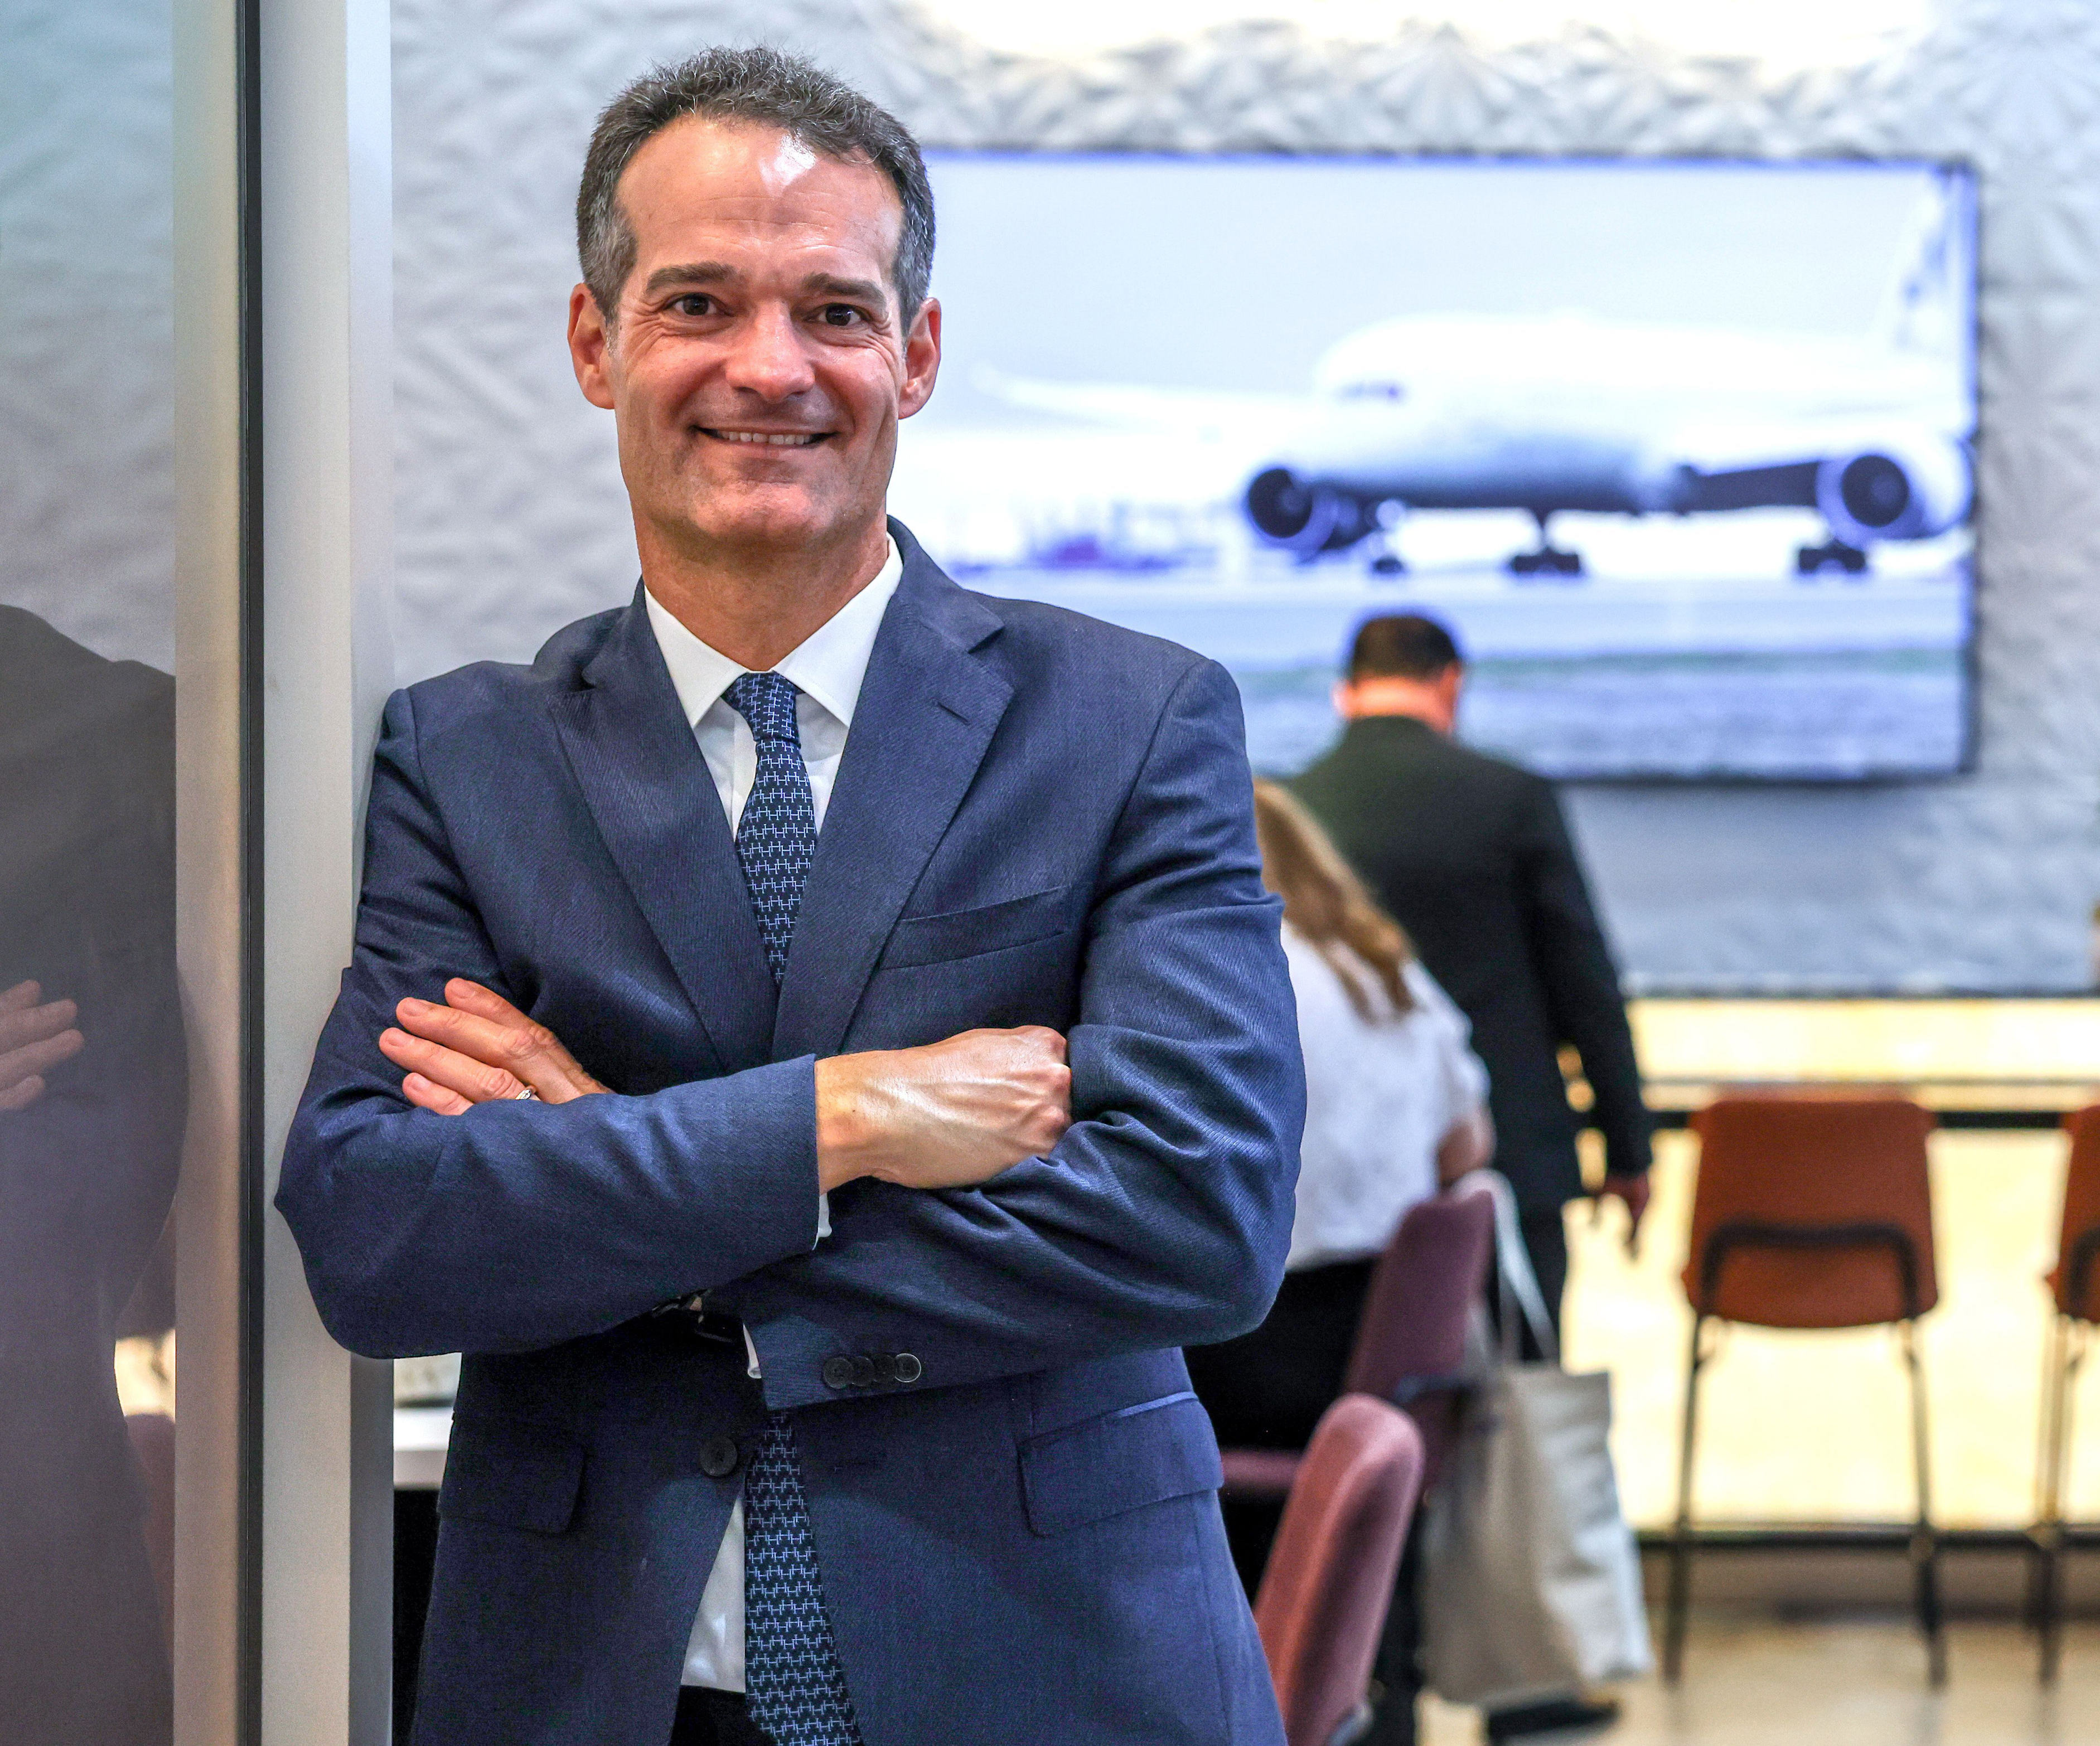 etihad boss would trade compensation for on-time plane deliveries